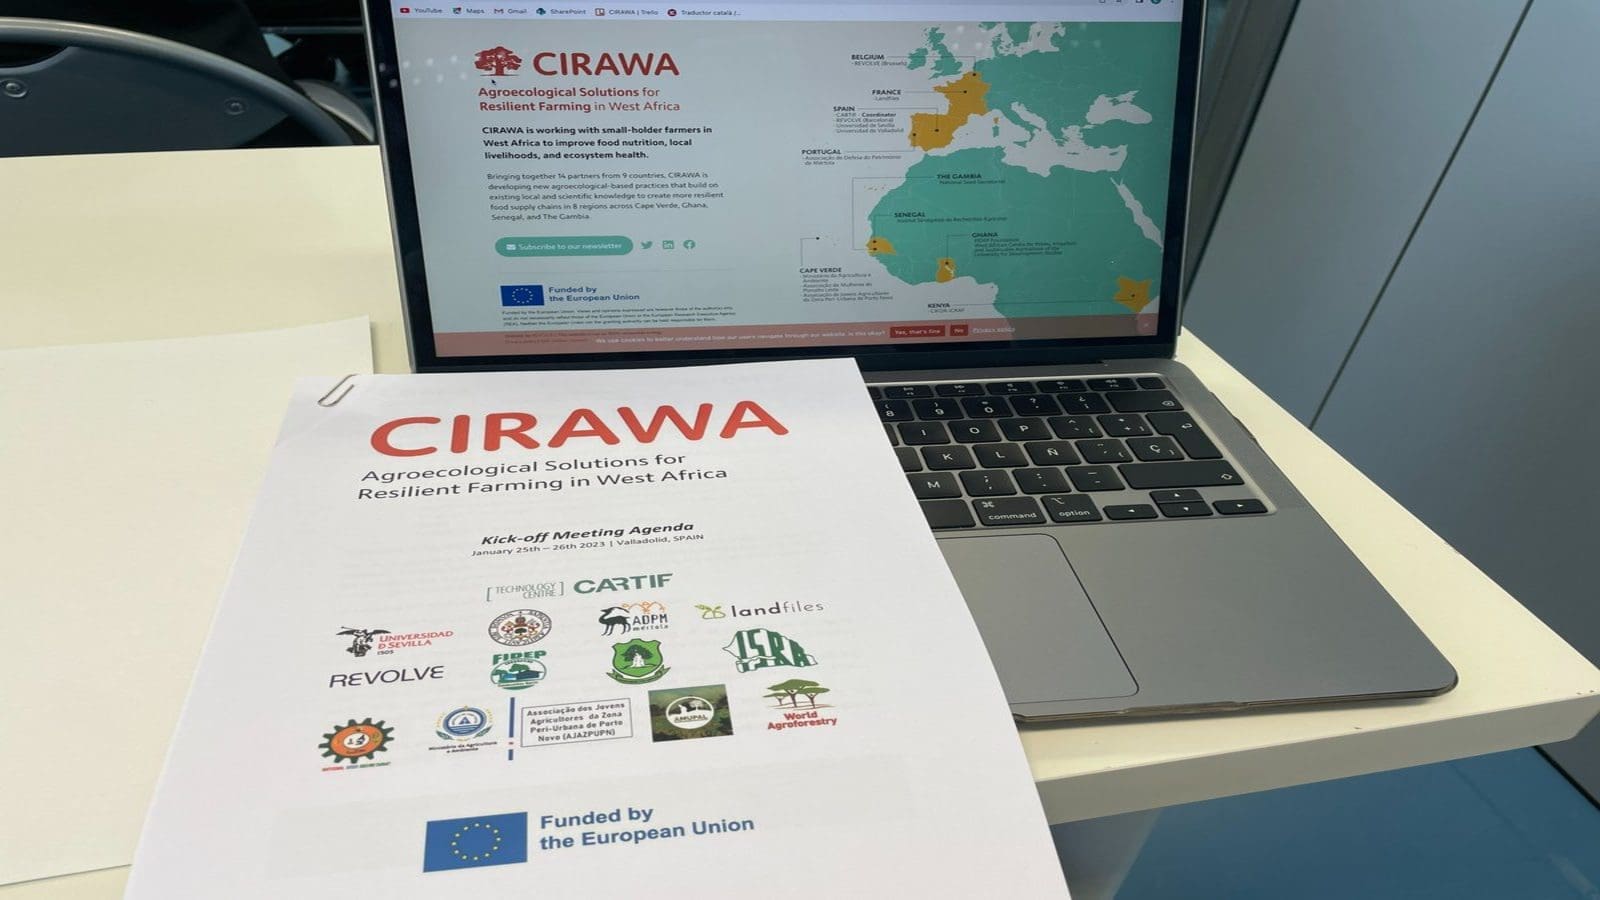 EU funds CIRAWA project aimed at building resilient food supply chains in West Africa